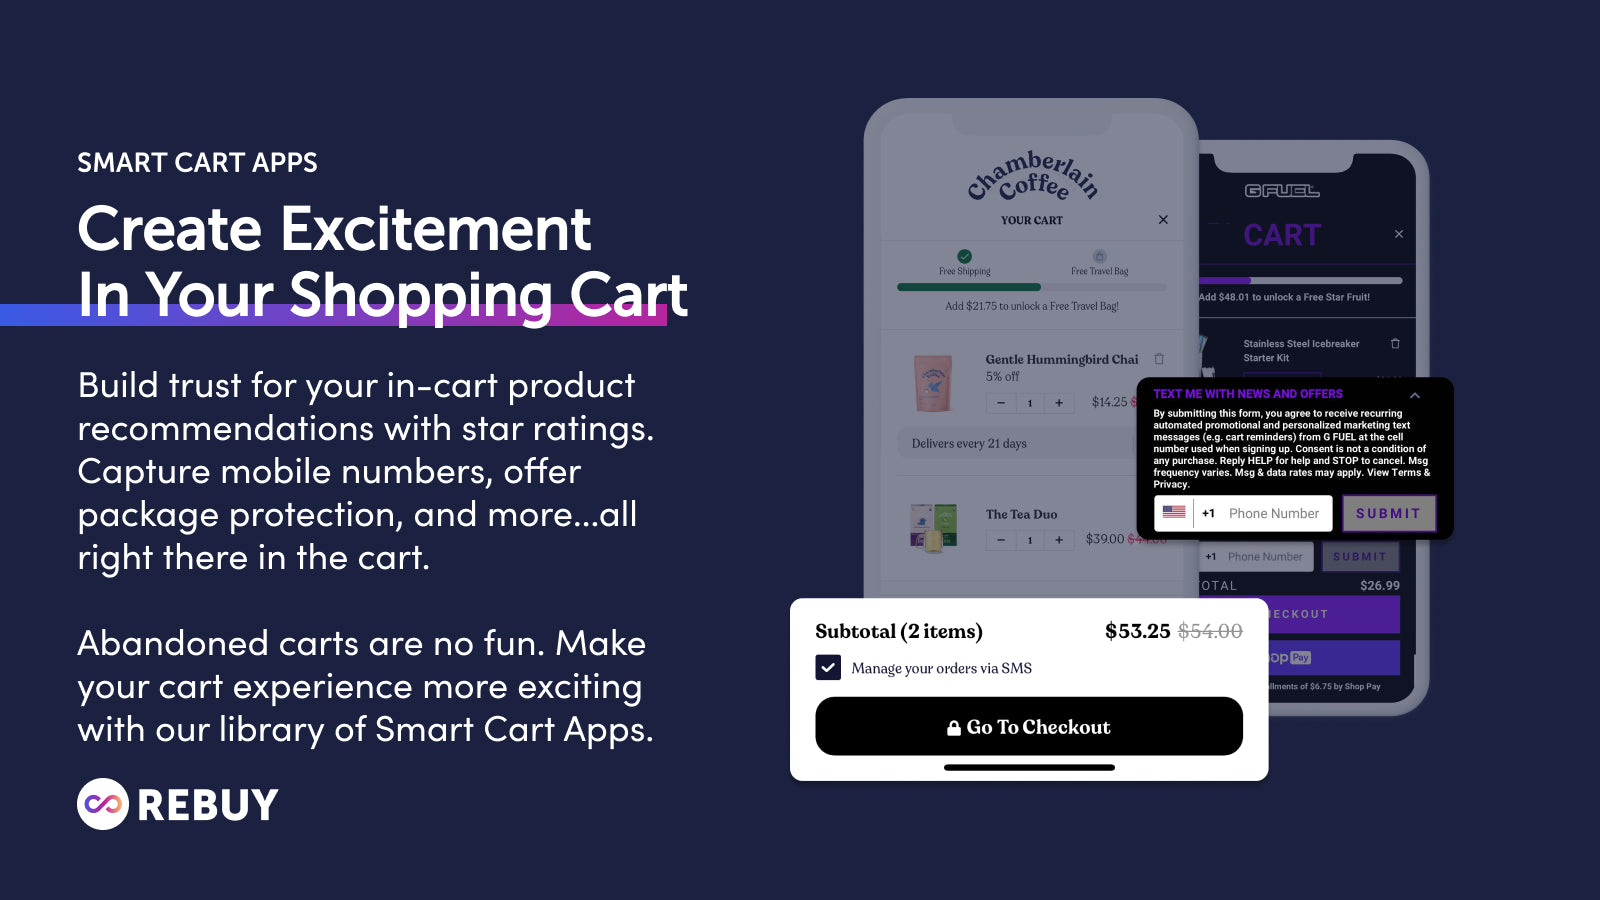 Create in-cart excitement and a better UX with Smart Cart Apps